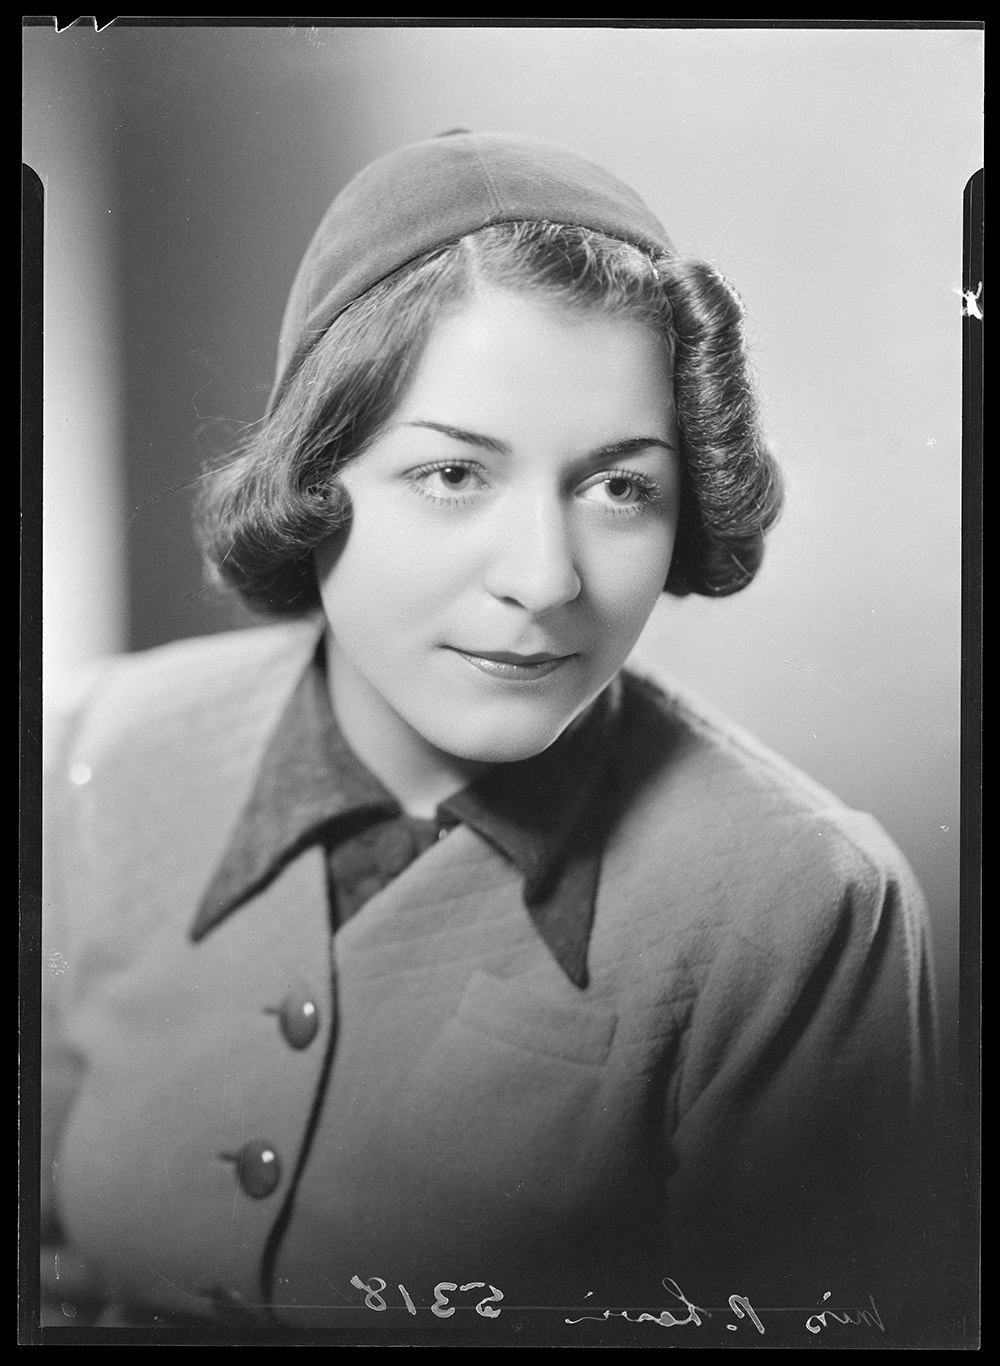 A black and white studio photograph of a woman with curled hair and wearing a hat that matches her jacket.